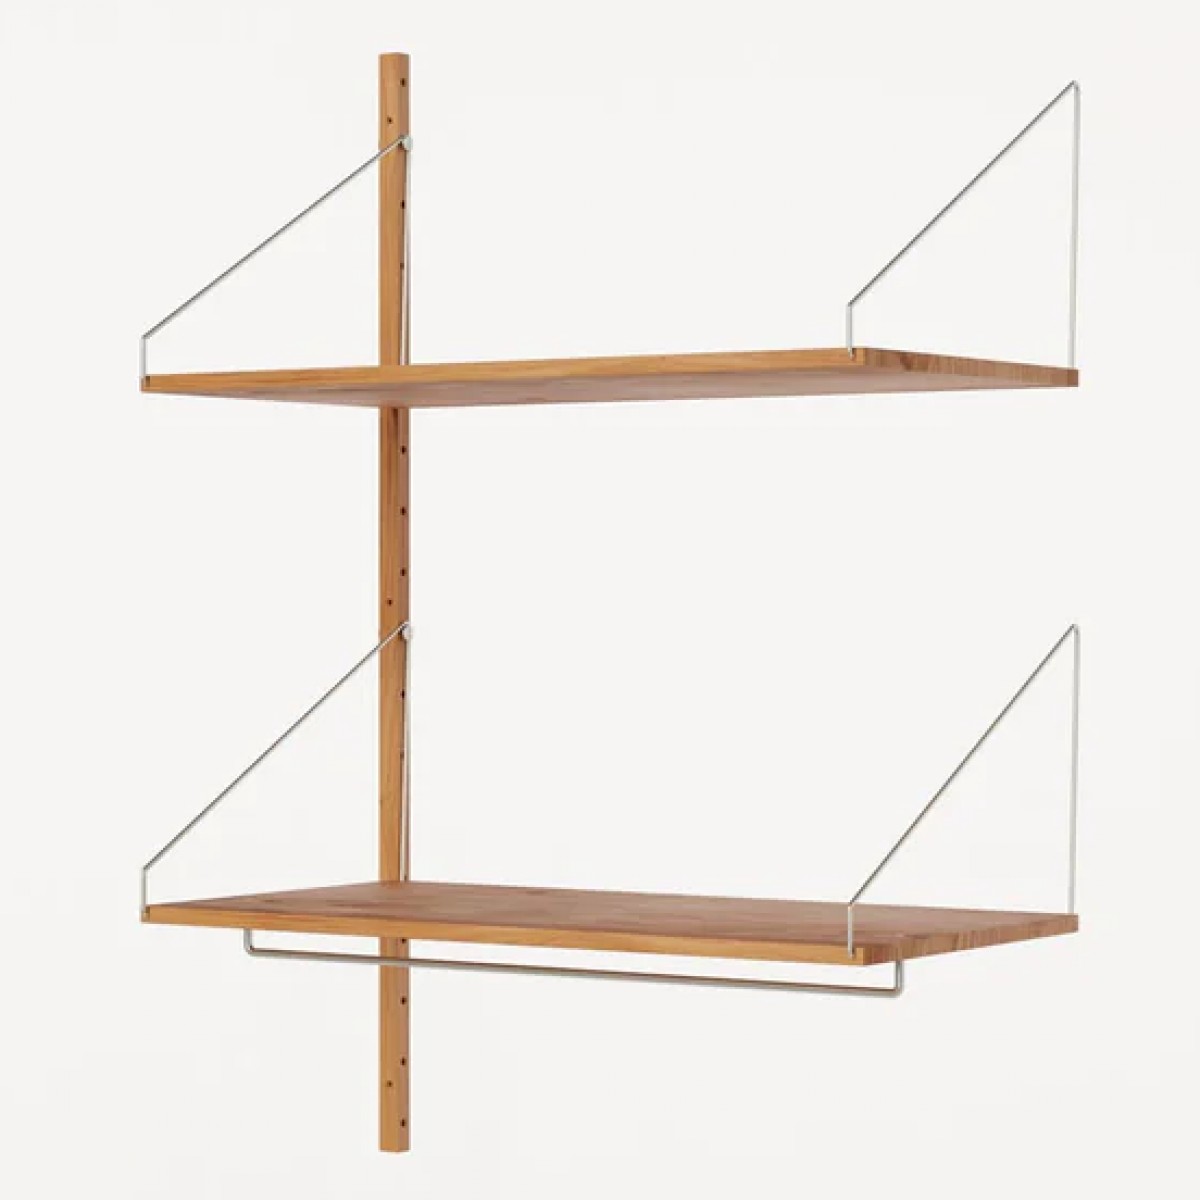 Shelf Library H1148 - Hanger Add-on Section